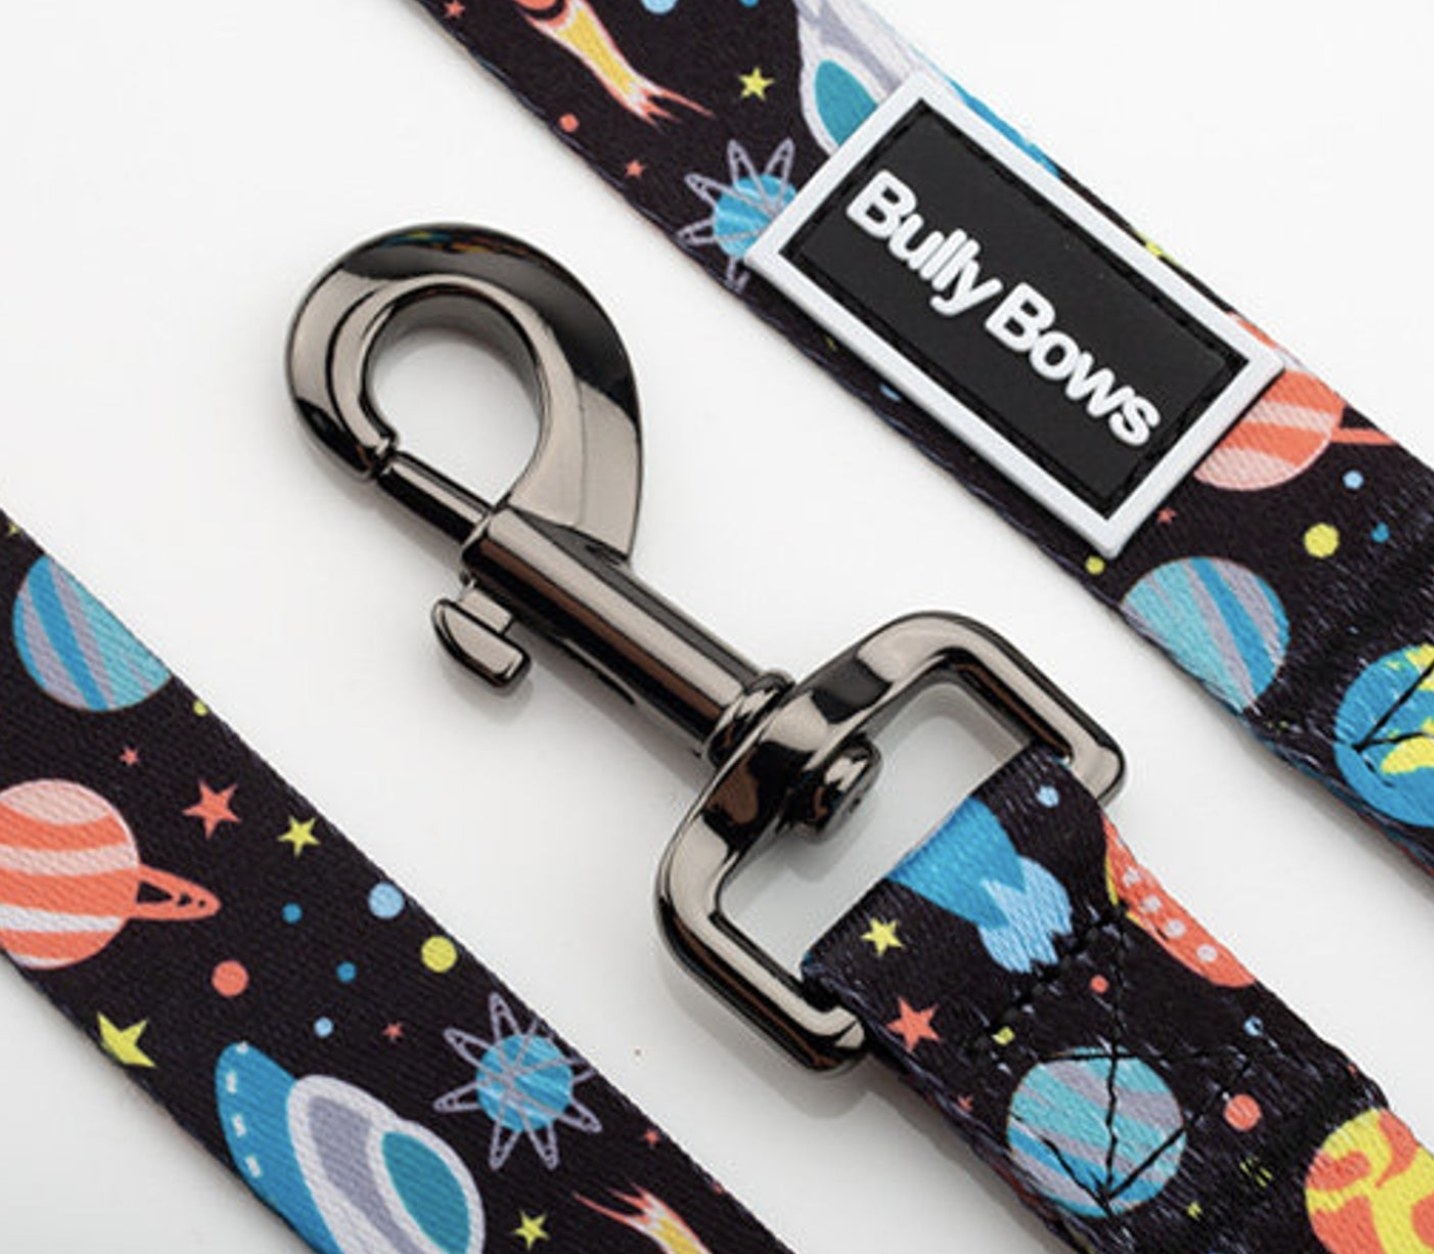 The space-themed leash